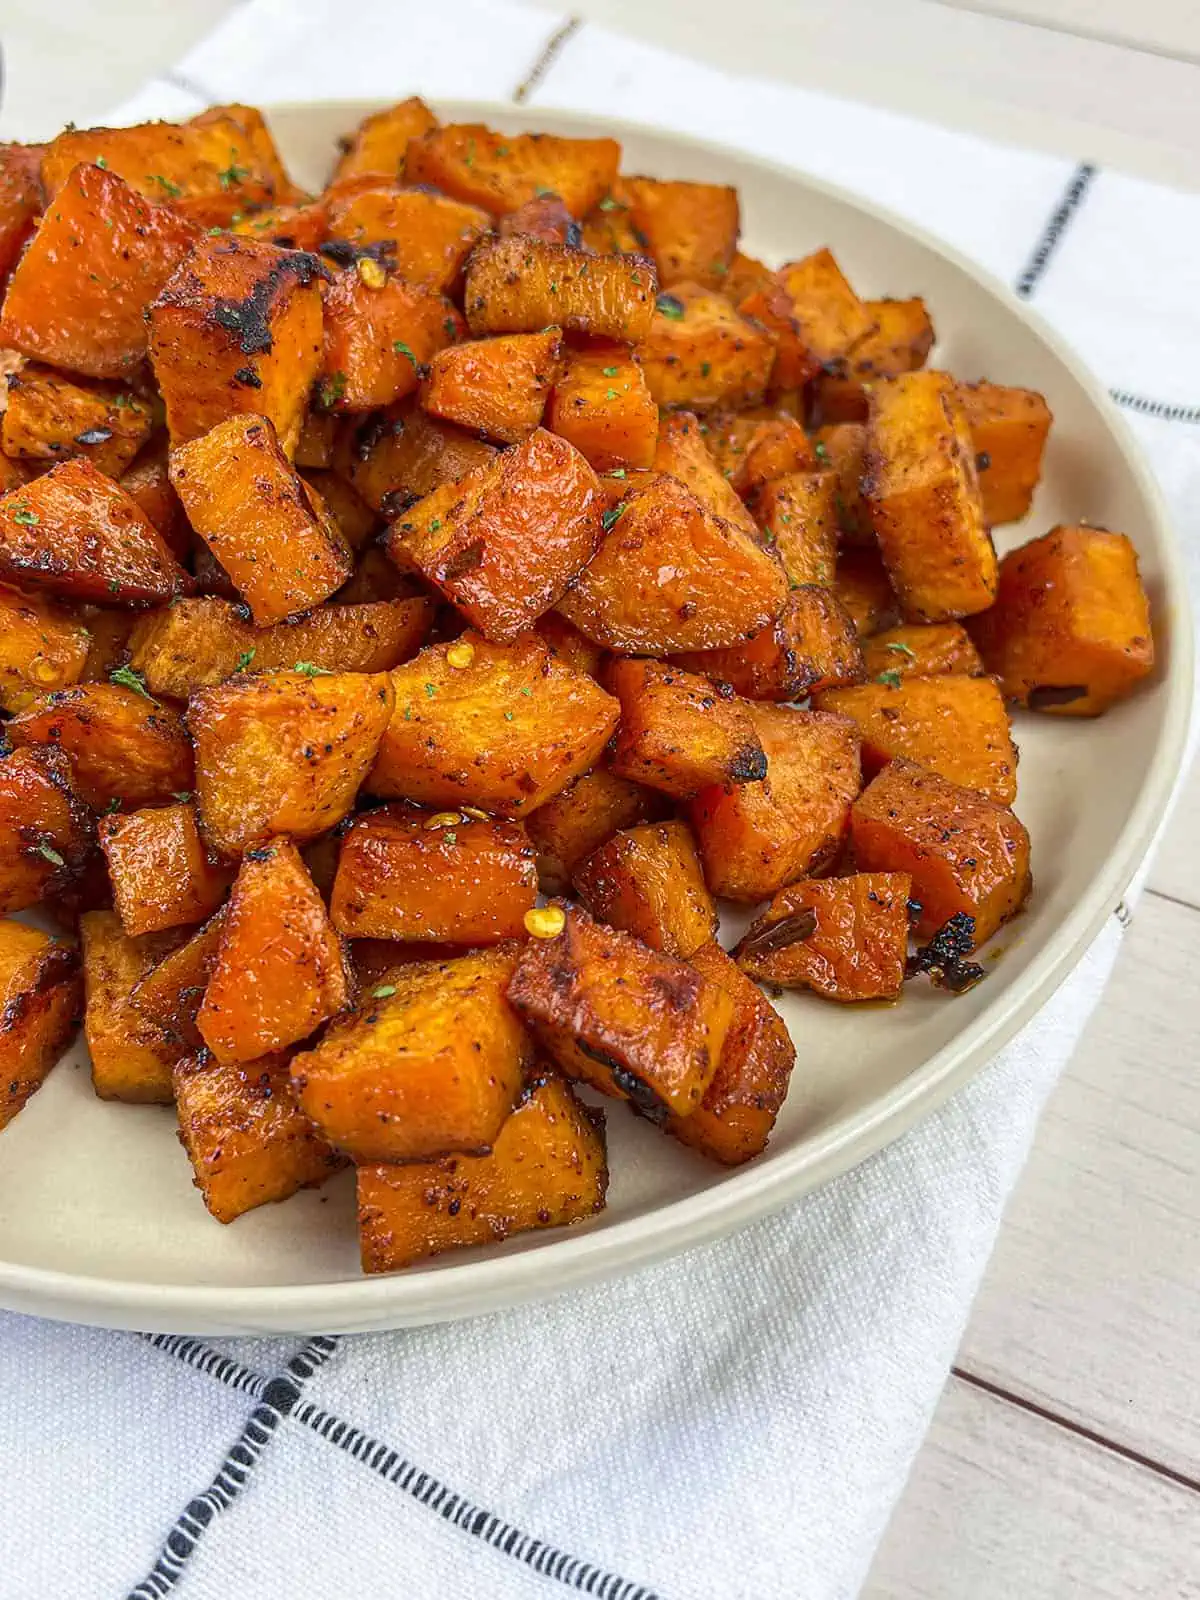 Sweet potato cubes that have been cooked on a plate with a white and blue striped napkin underneath.